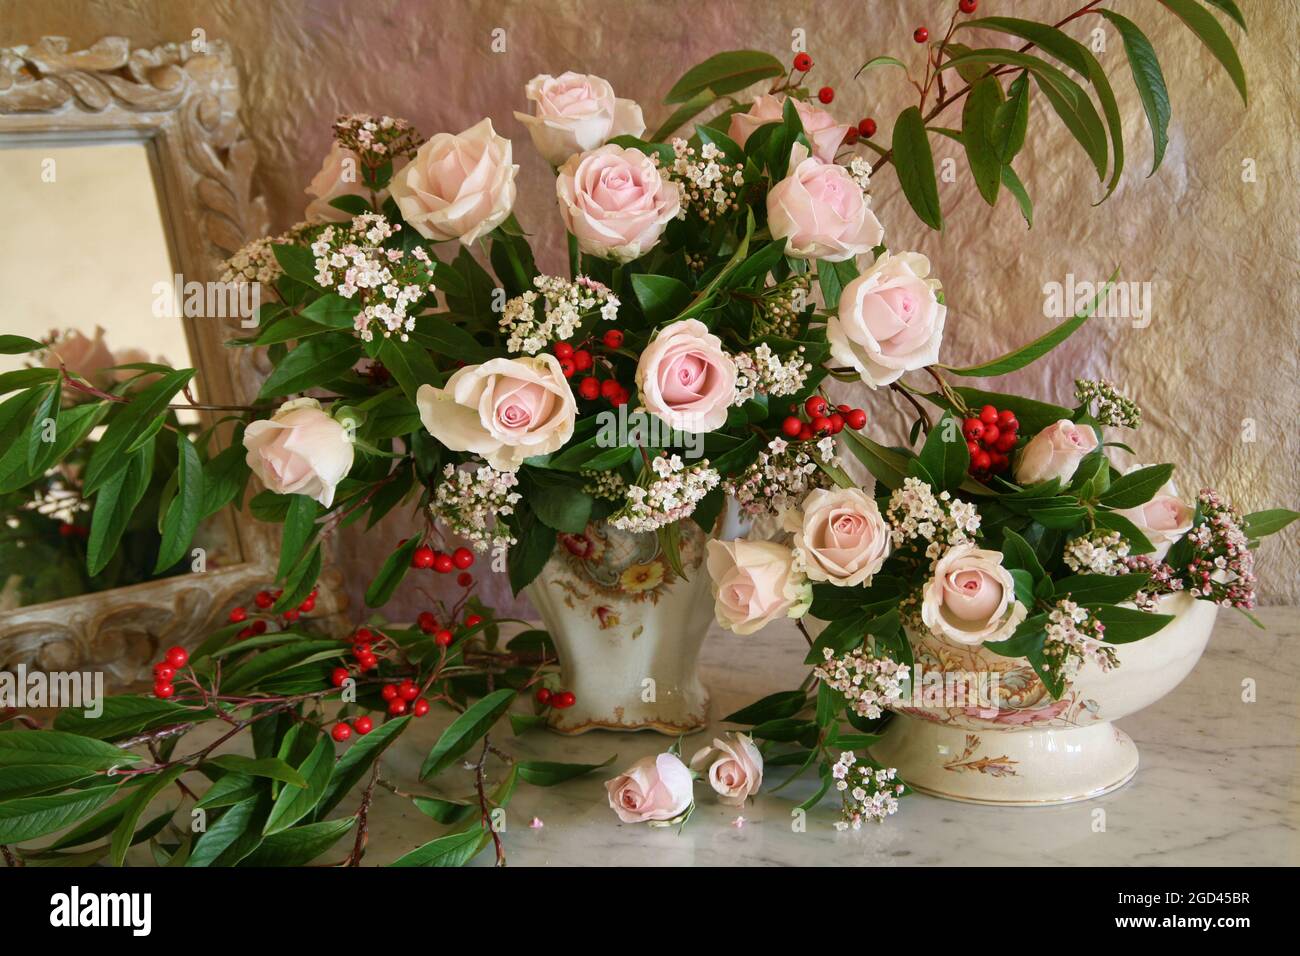 botany, pink roses, cotoneaster berries in an antique jug and bowl on a marble table., ADDITIONAL-RIGHTS-CLEARANCE-INFO-NOT-AVAILABLE Stock Photo